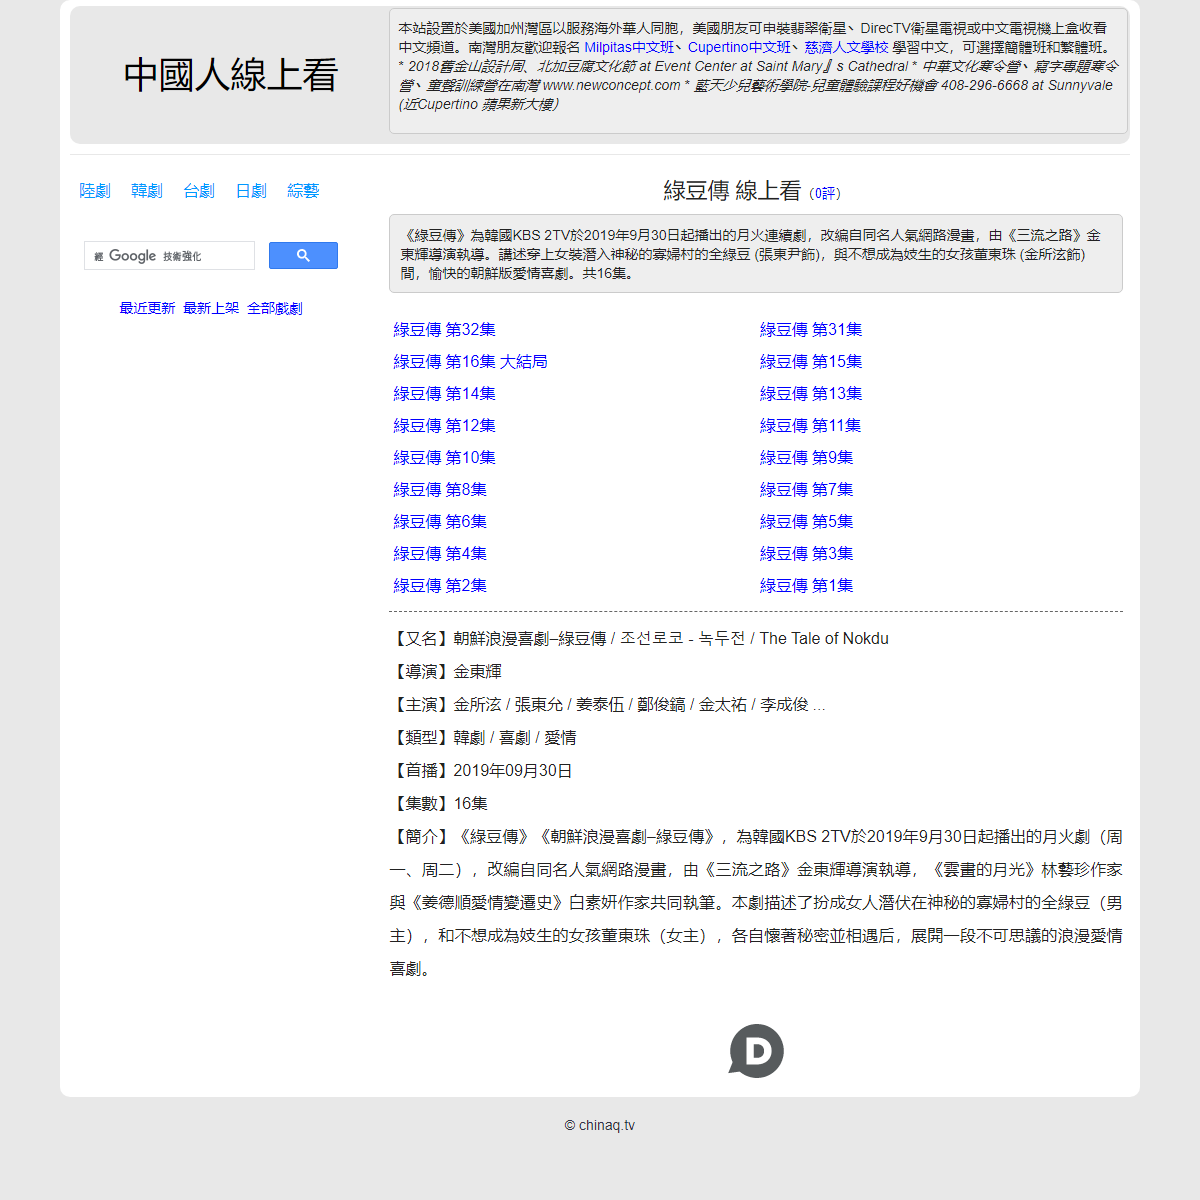 A complete backup of https://chinaq.tv/kr190930/